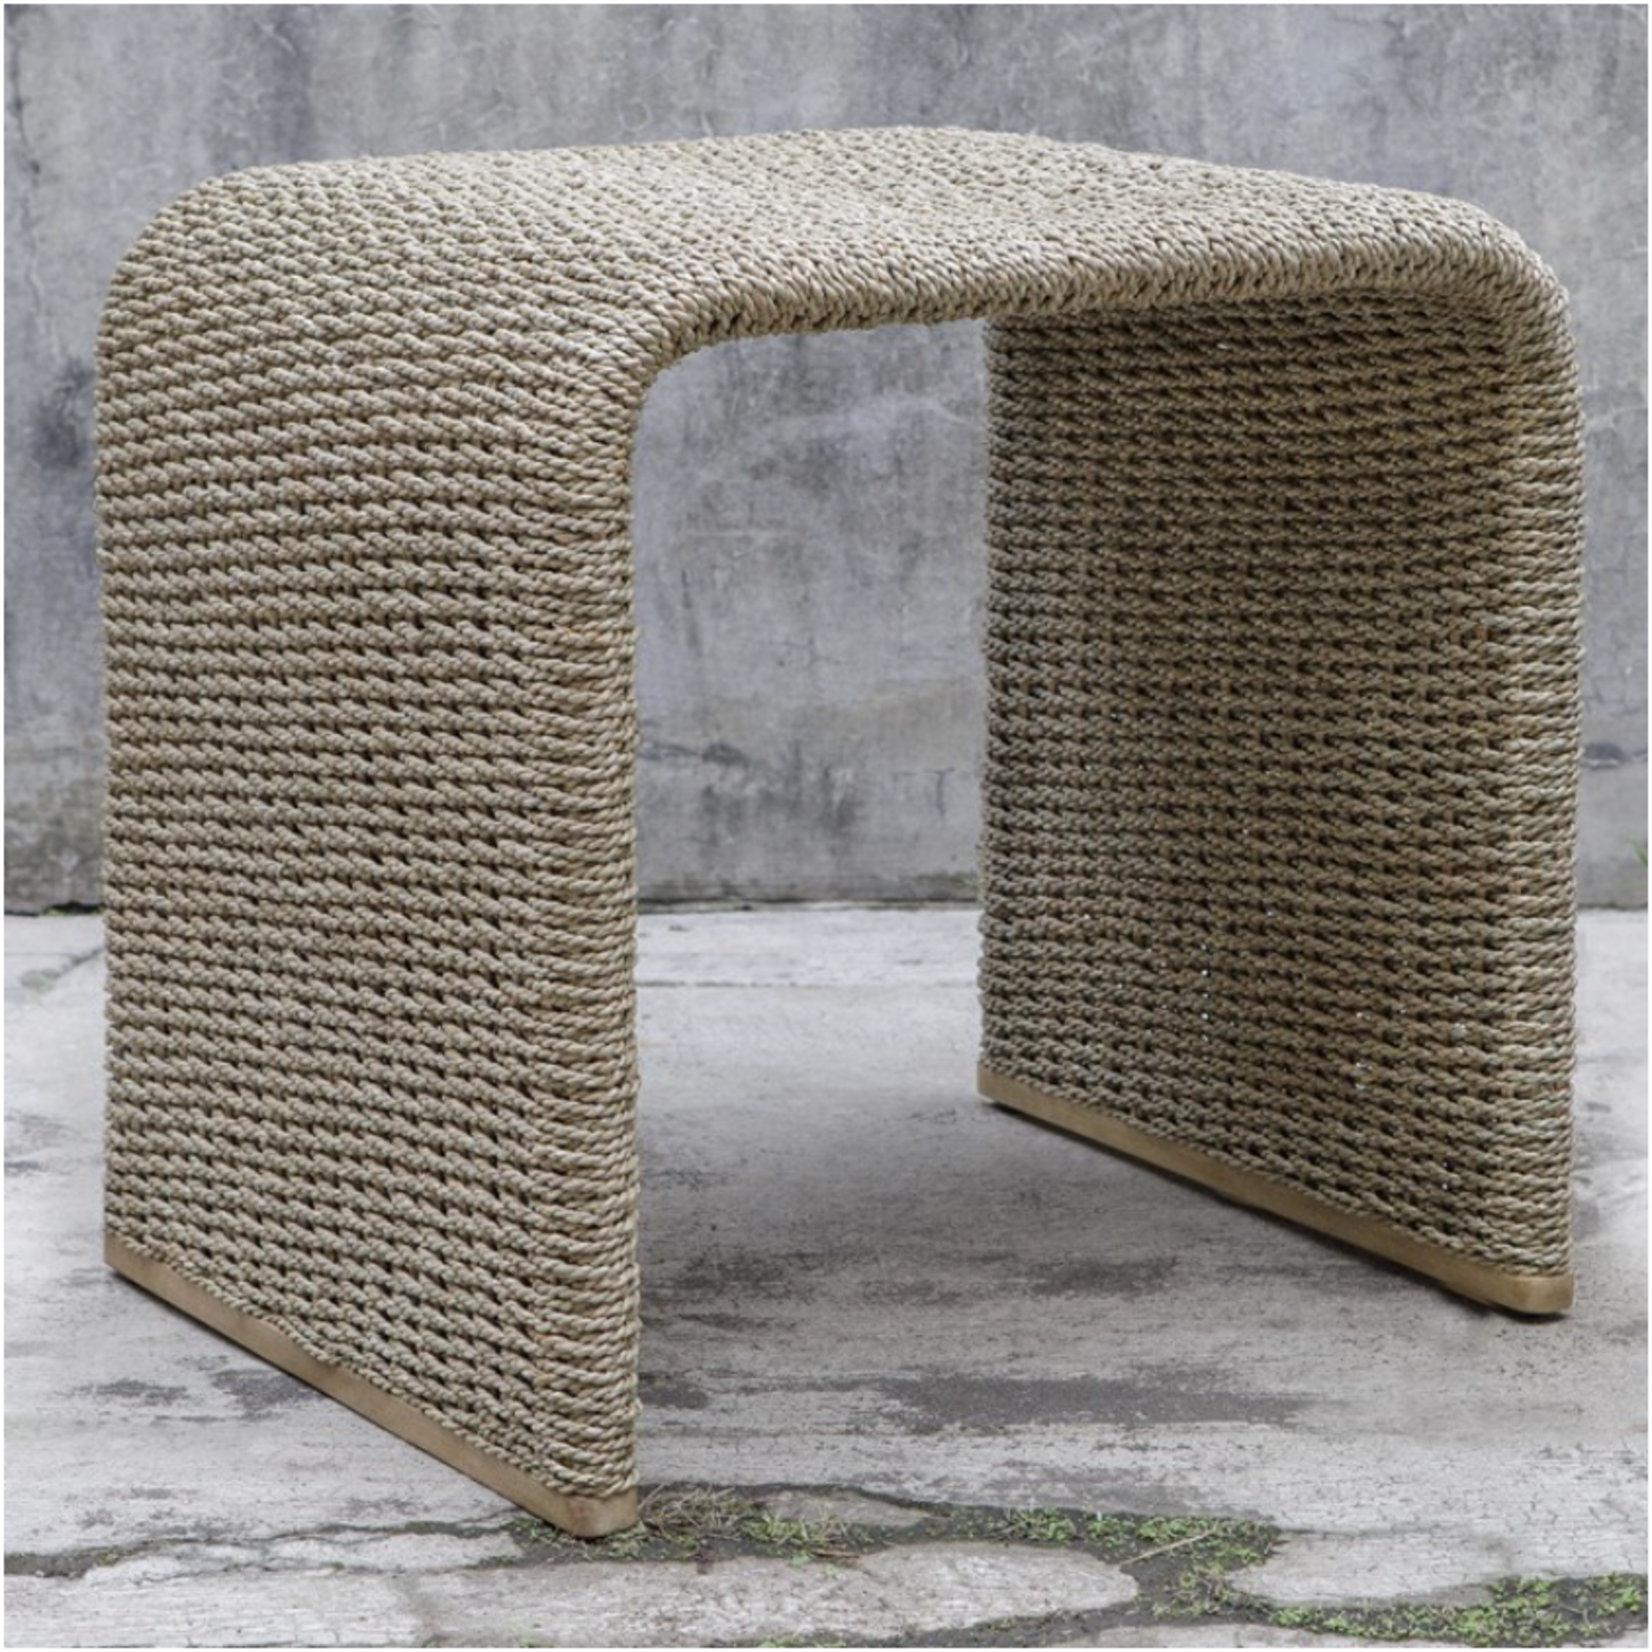 Outside The Box 24x24x20 Calabria Woven Seagrass & Mango Wood End Table